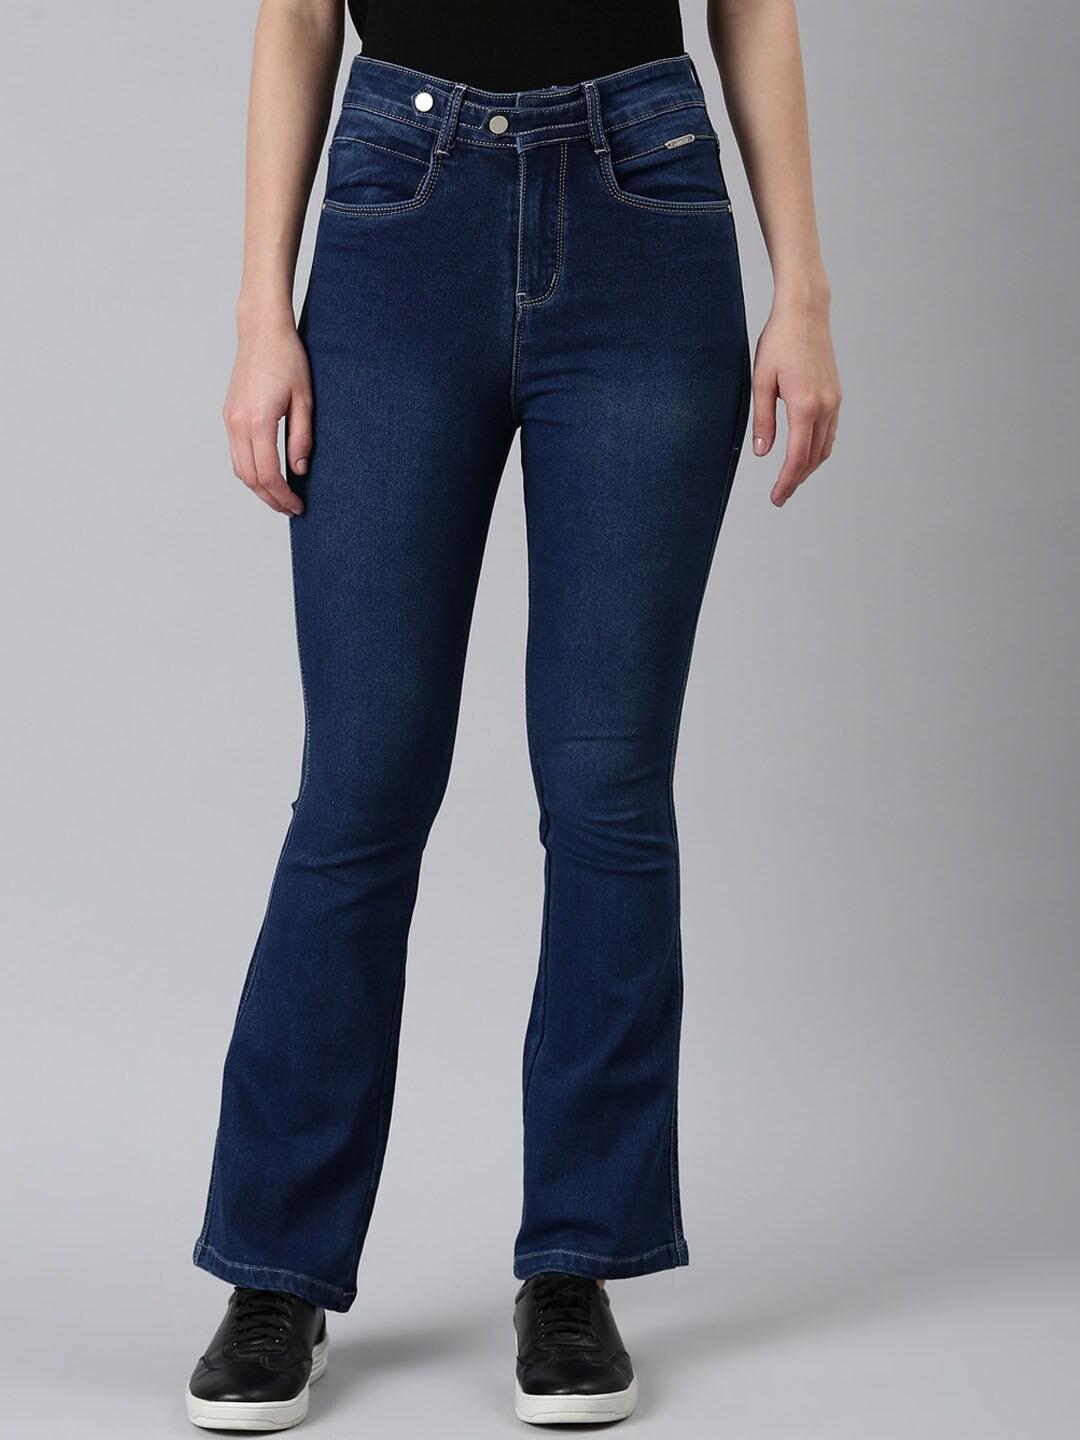 SHOWOFF Jean Acid Wash Bootcut Mid-Rise Clean Look Stretchable Cotton  Jeans